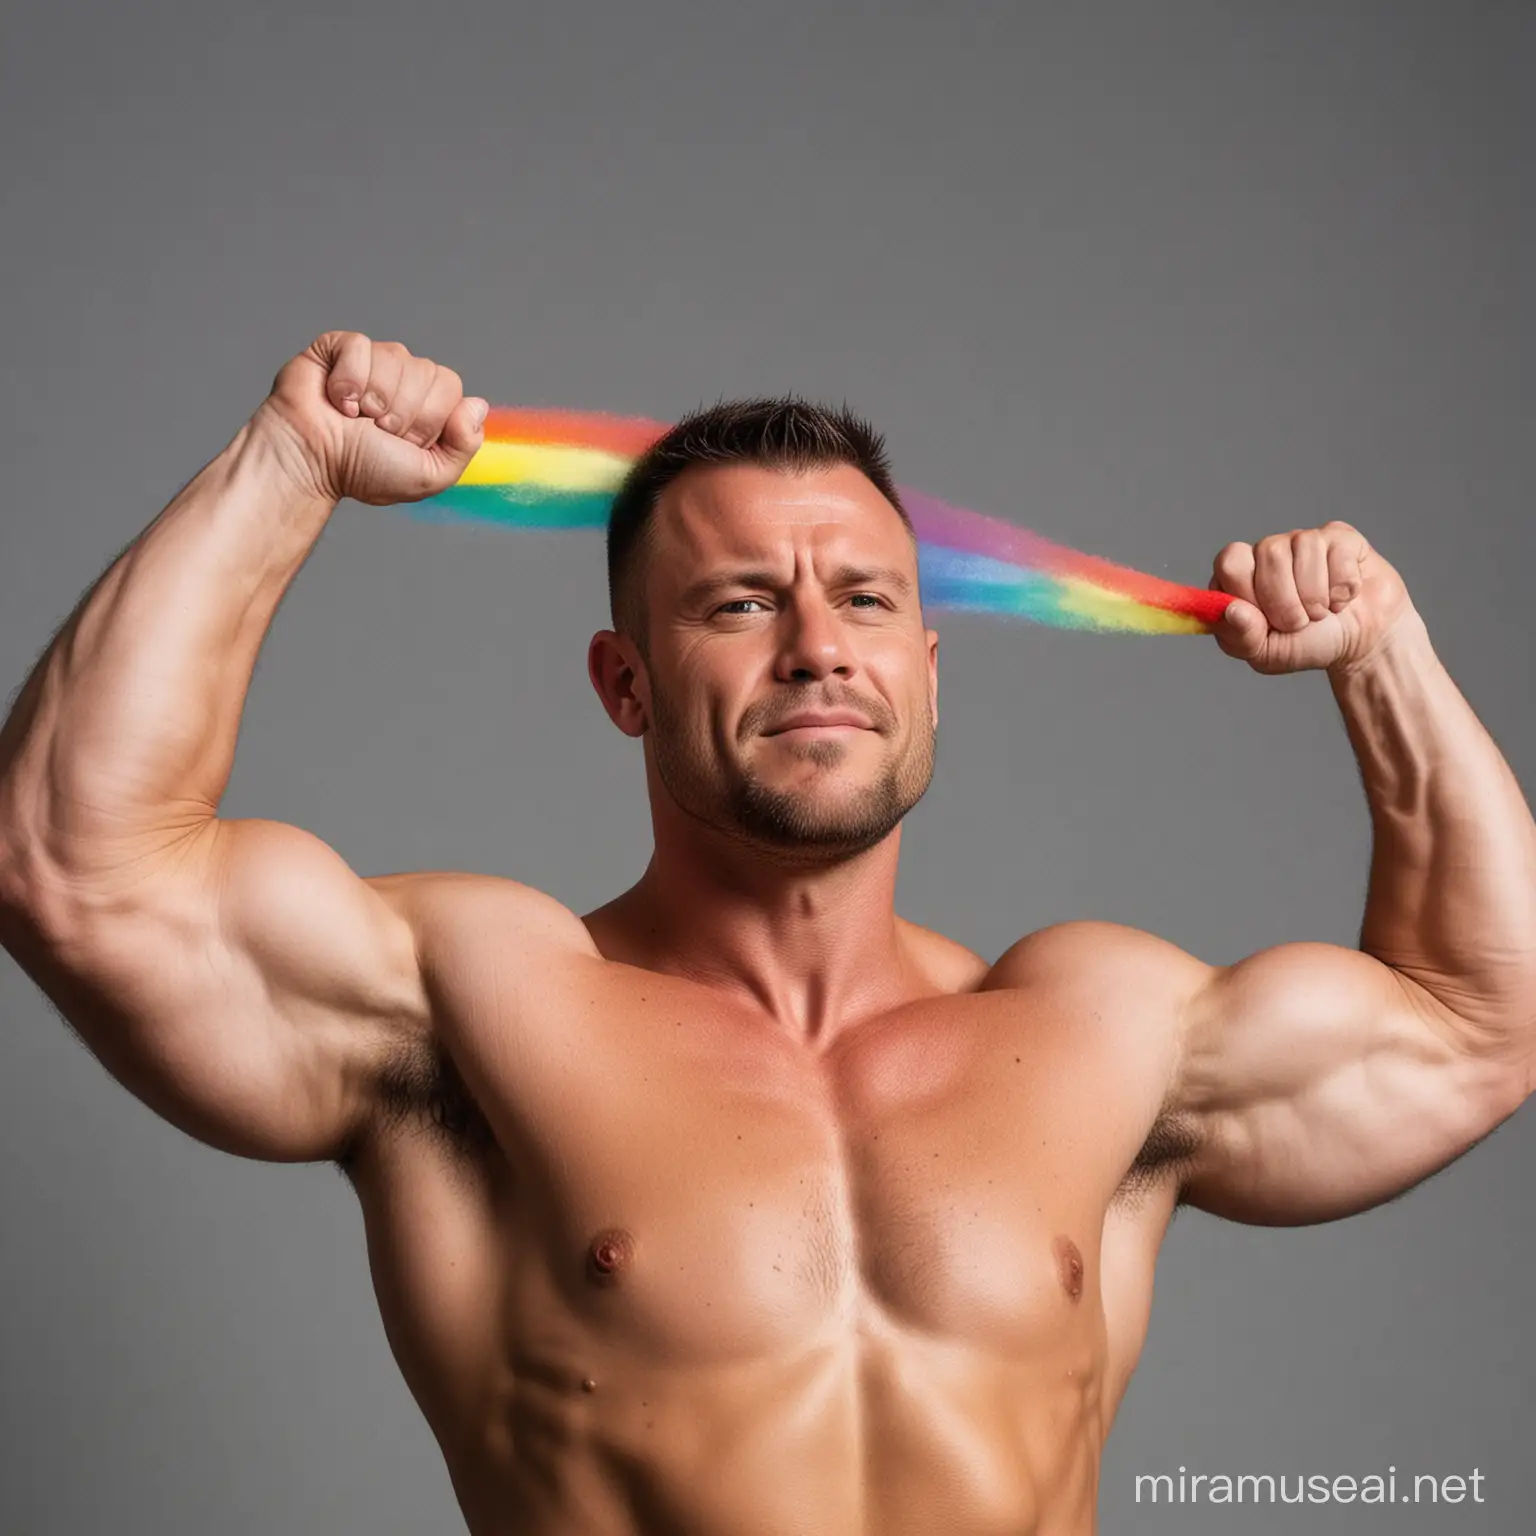 Close Up Side Shot Topless 30s Ultra Muscular World's Strongest Man doing excises Holding Big Bright Rainbow Heavy Weights and Flexing his left arm